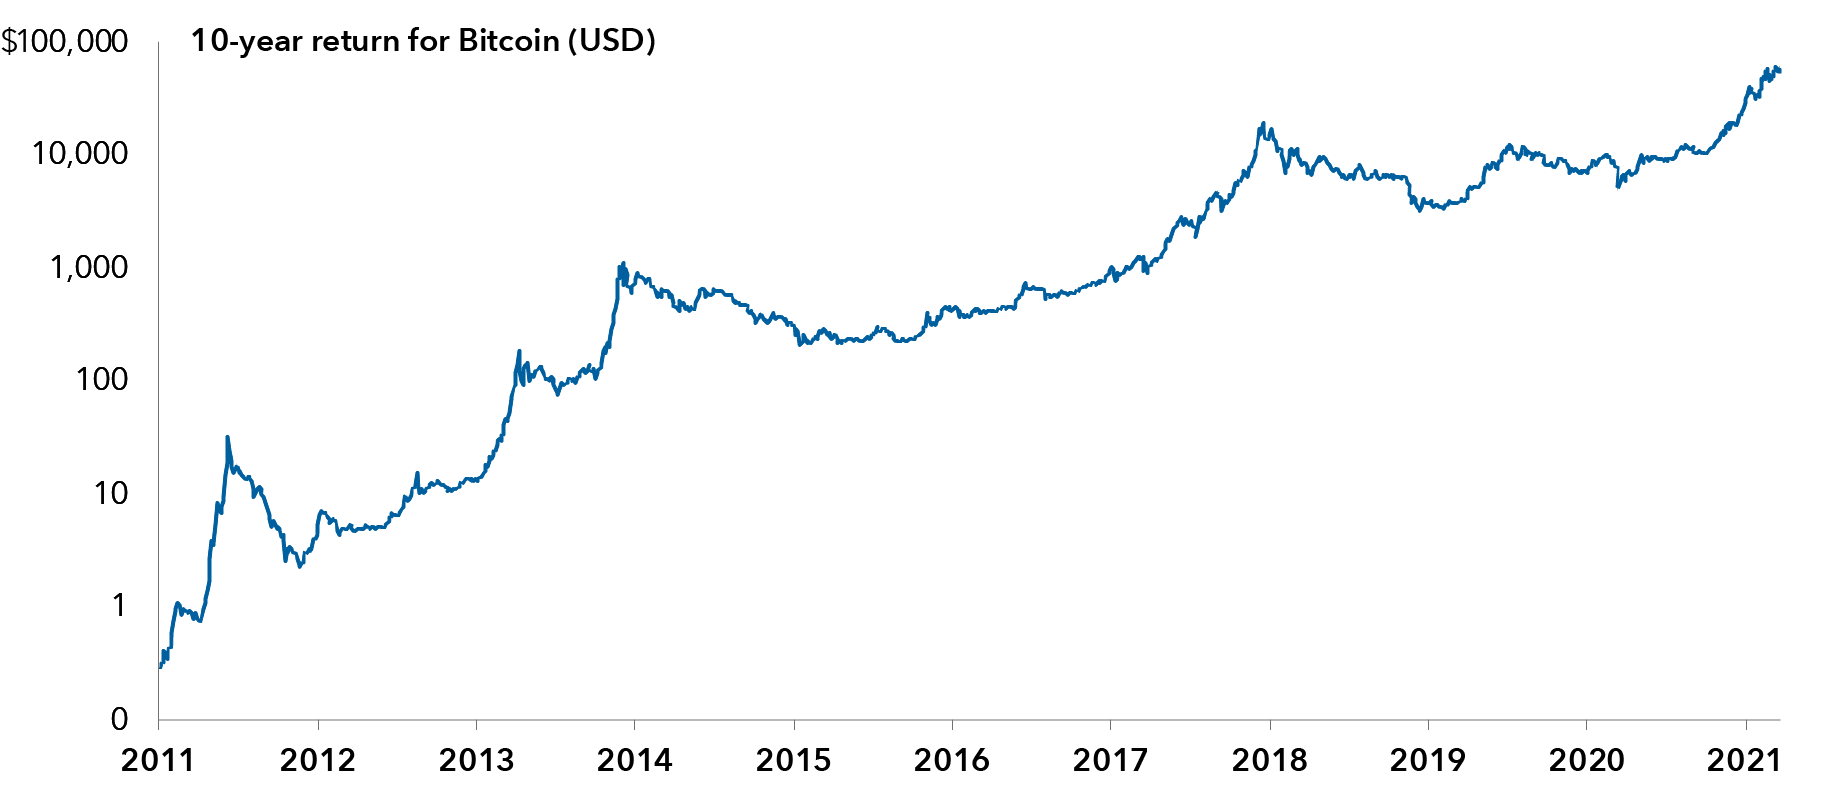 This chart shows the price of Bitcoin from January 2, 2011 through March 23, 2021. As of January 2, 2011, Bitcoin was worth 30 cents in U.S. dollar terms. As of January 3, 2012, Bitcoin was worth $5 in U.S. dollar terms. As of January 3, 2013, Bitcoin was worth $13 in U.S. dollar terms. As of January 1, 2014, Bitcoin was worth $732 in U.S. dollar terms. As of January 2, 2015, Bitcoin was worth $315 in U.S. dollar terms. As of January 3, 2016, Bitcoin was worth $433 in U.S. dollar terms. As of January 3, 2017, Bitcoin was worth $1,031 in U.S. dollar terms. As of January 1, 2018, Bitcoin was worth $13,976 in U.S. dollar terms. As of January 2, 2019, Bitcoin was worth $3,855 in U.S. dollar terms. As of January 3, 2020, Bitcoin was worth $6,944 in U.S. dollar terms. As of March 23, 2021, Bitcoin was worth $54,205 in U.S. dollar terms. Source: Blockchain.com.